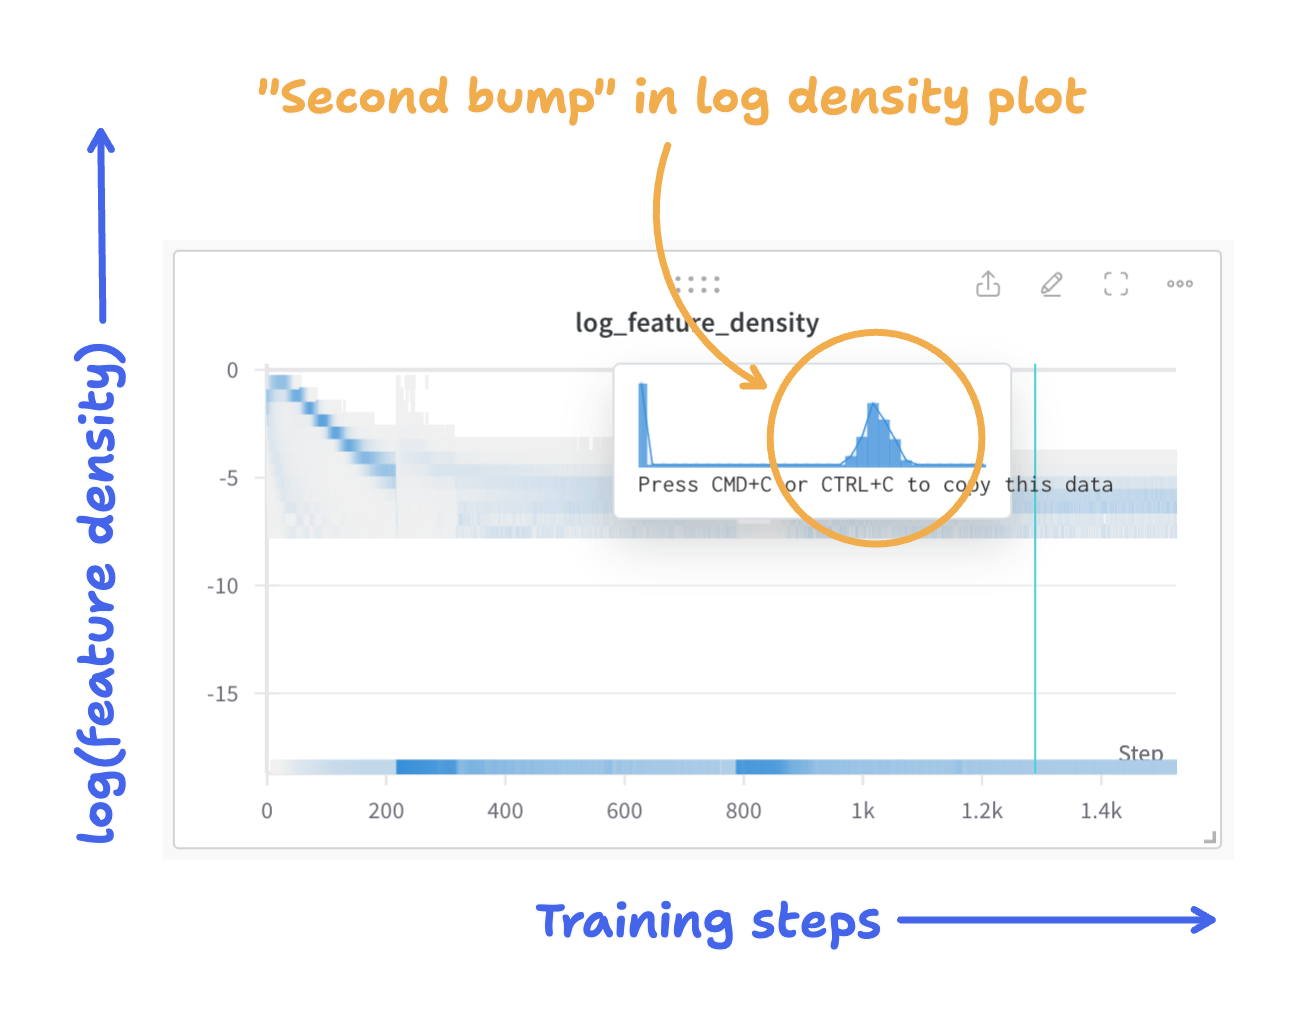 Graph showing log feature density over training steps. The y-axis ranges from -15 to 0, x-axis from 0 to 1.4k steps. The plot displays a prominent spike at the left edge and a smaller ‘second bump’ around -6 log density, highlighted by an orange circle. Handwritten labels indicate ‘Training steps’ on x-axis and point out the ‘Second bump in log density plot’.